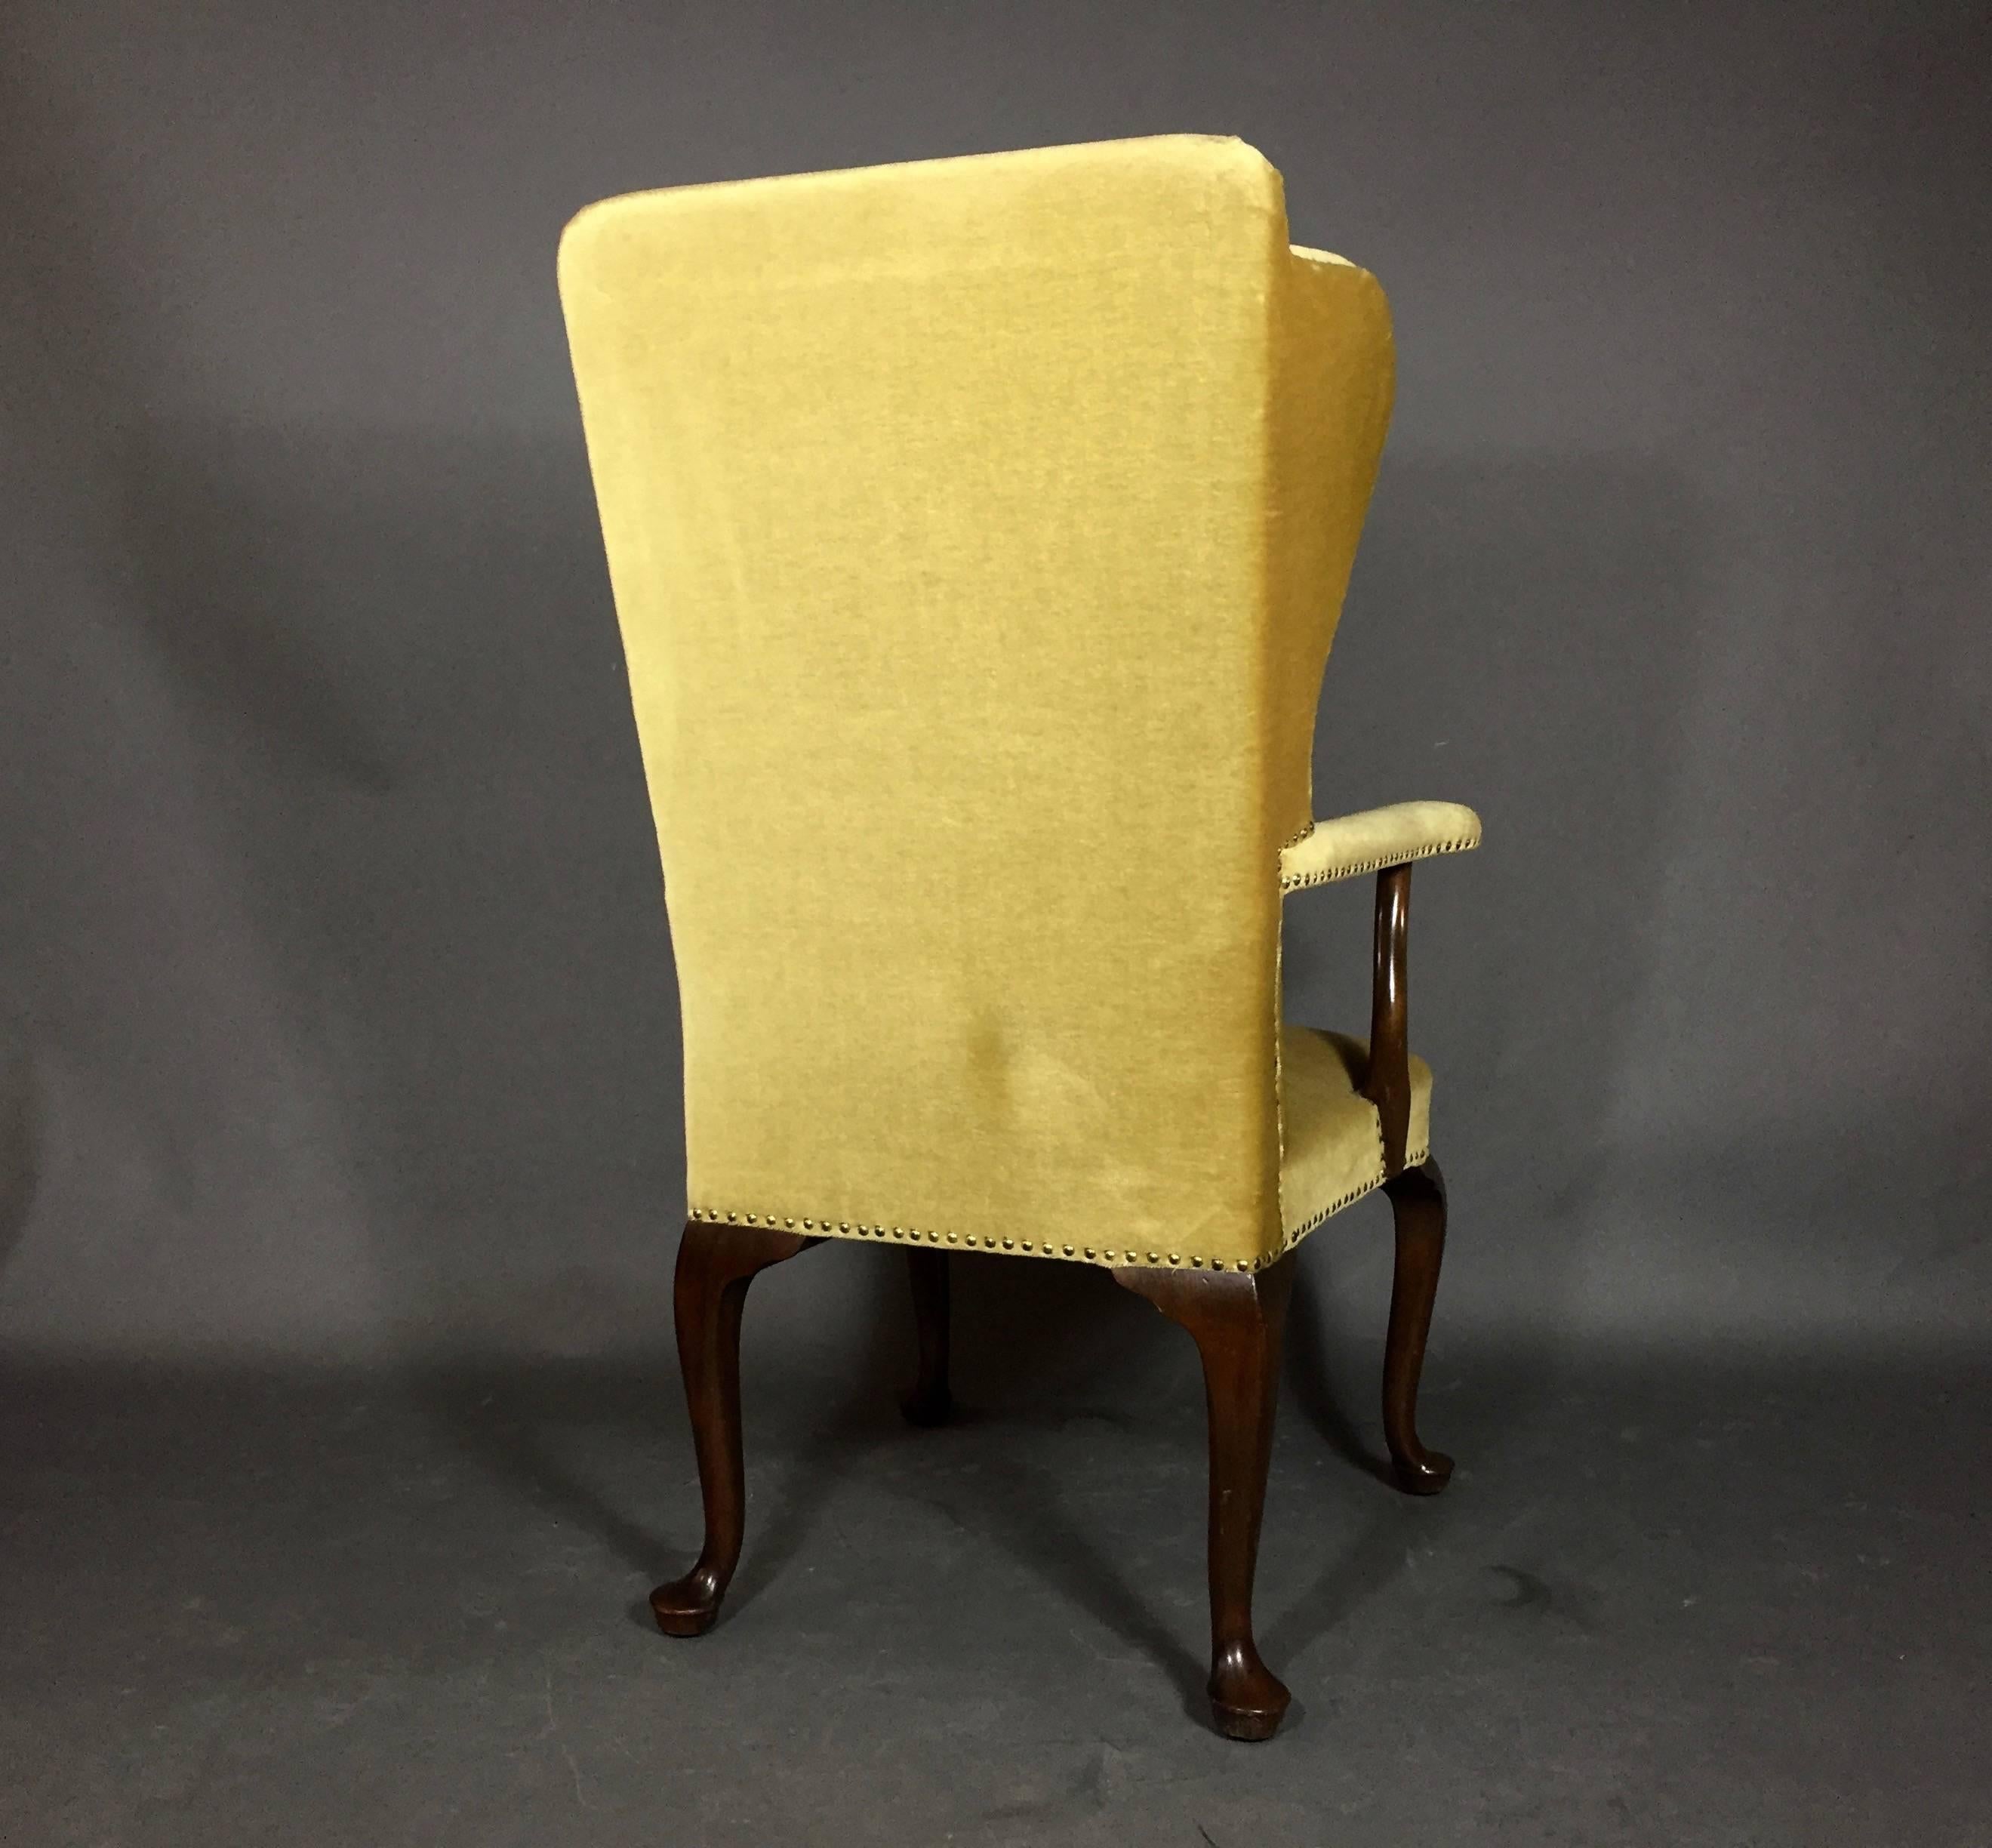 Wingback chair with stained beech frame, upholstered in seat, back, armrests with light gold mohair and studded with brass nails. Ascribed to Frits Henningsen, early 1940s, Denmark.